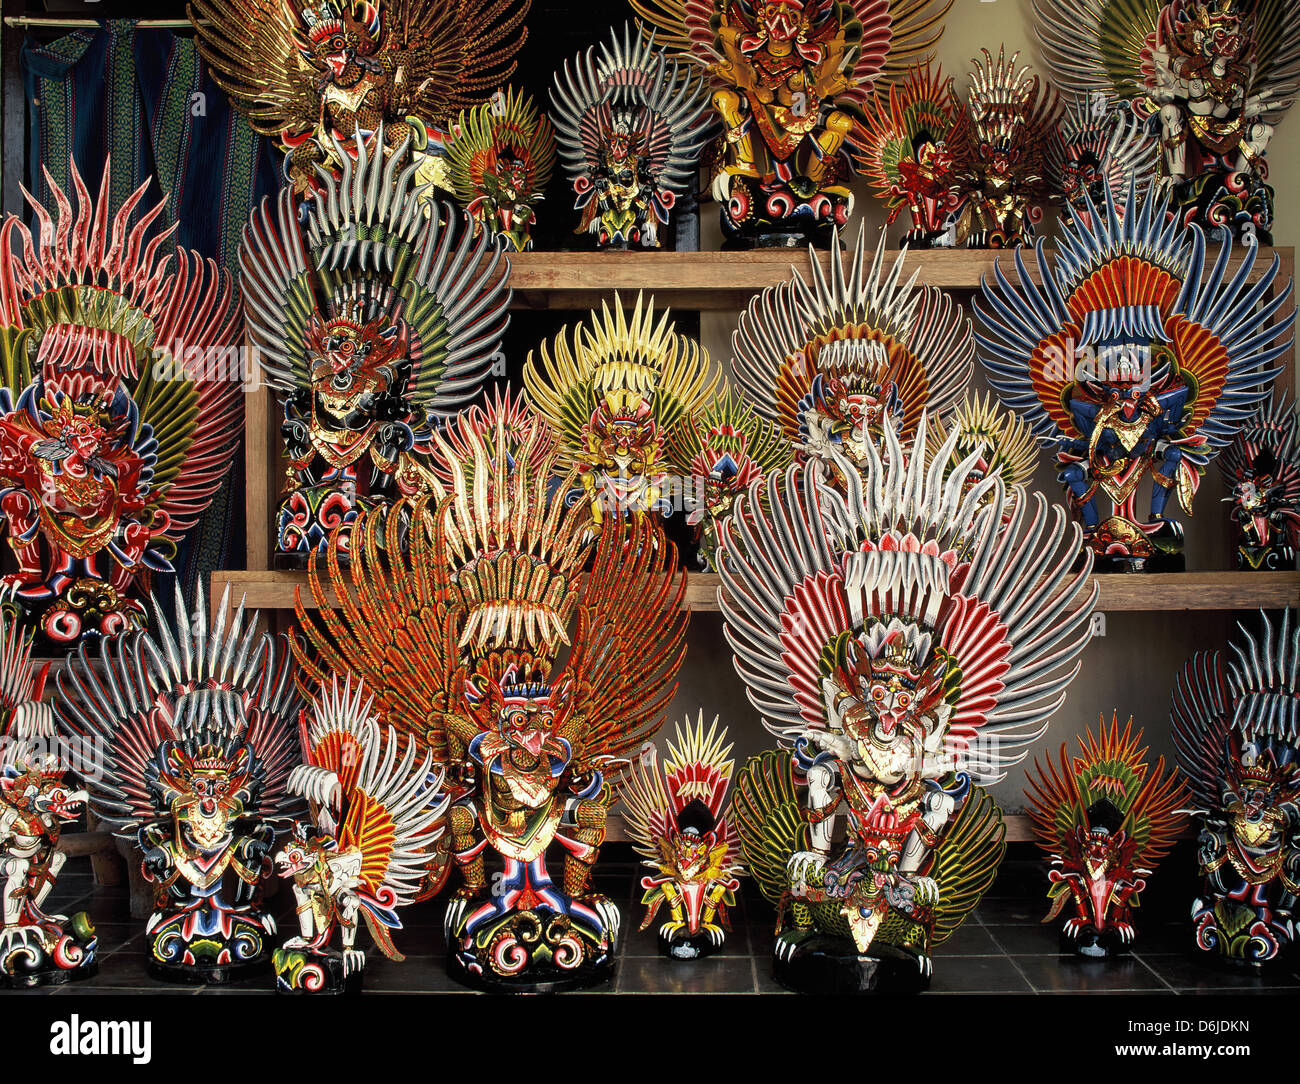 Carved and brightly-painted Garudas at a souvenir shop in Bali, Indonesia, Southeast Asia, Asia Stock Photo